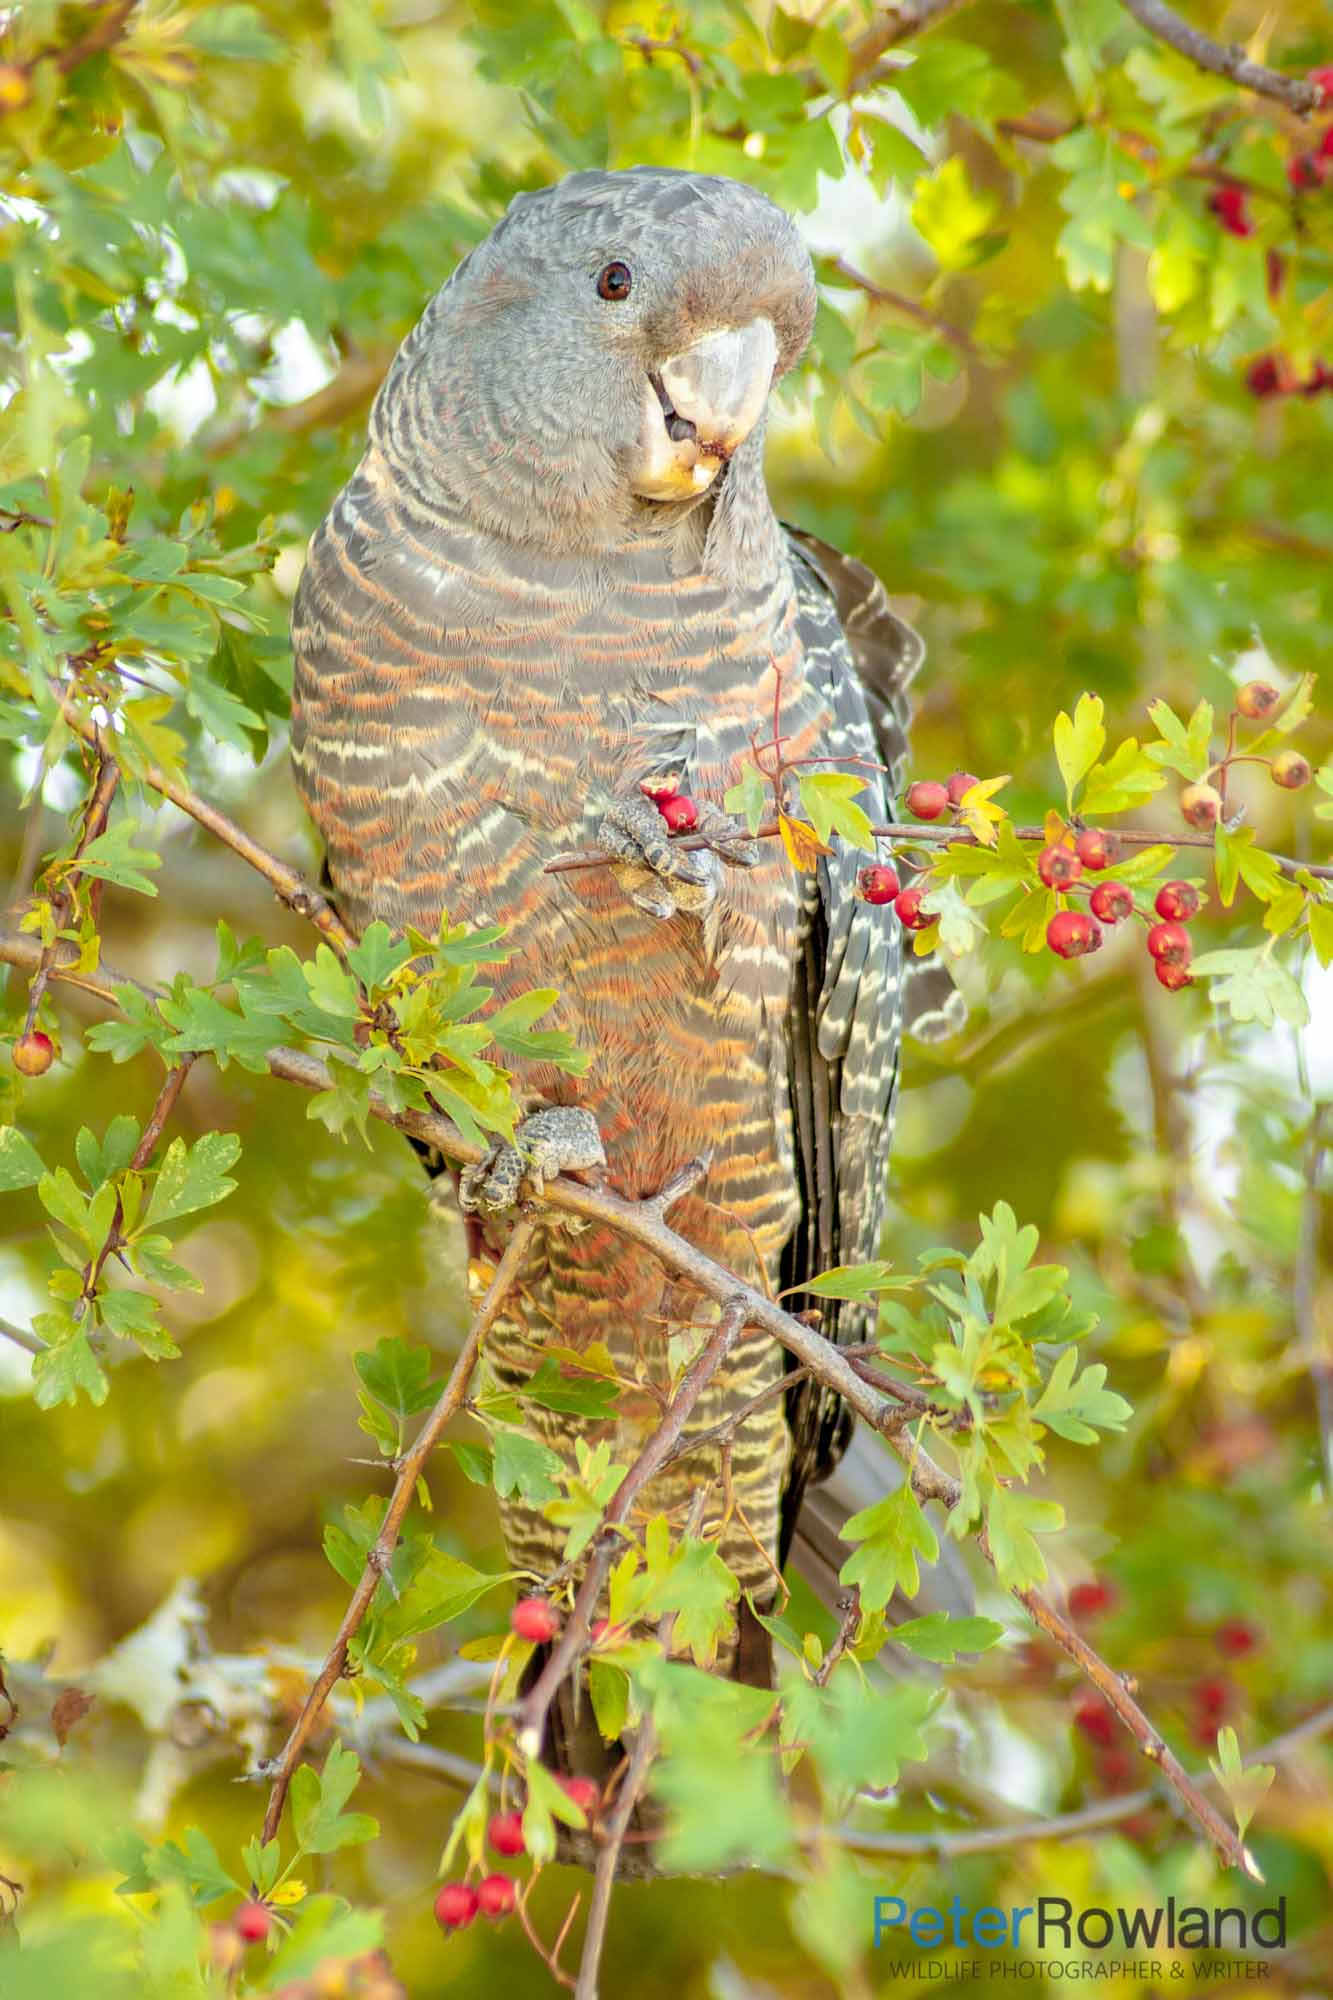 A female Gang-gang Cockatoo grasping Hawthorn berries in its left foot